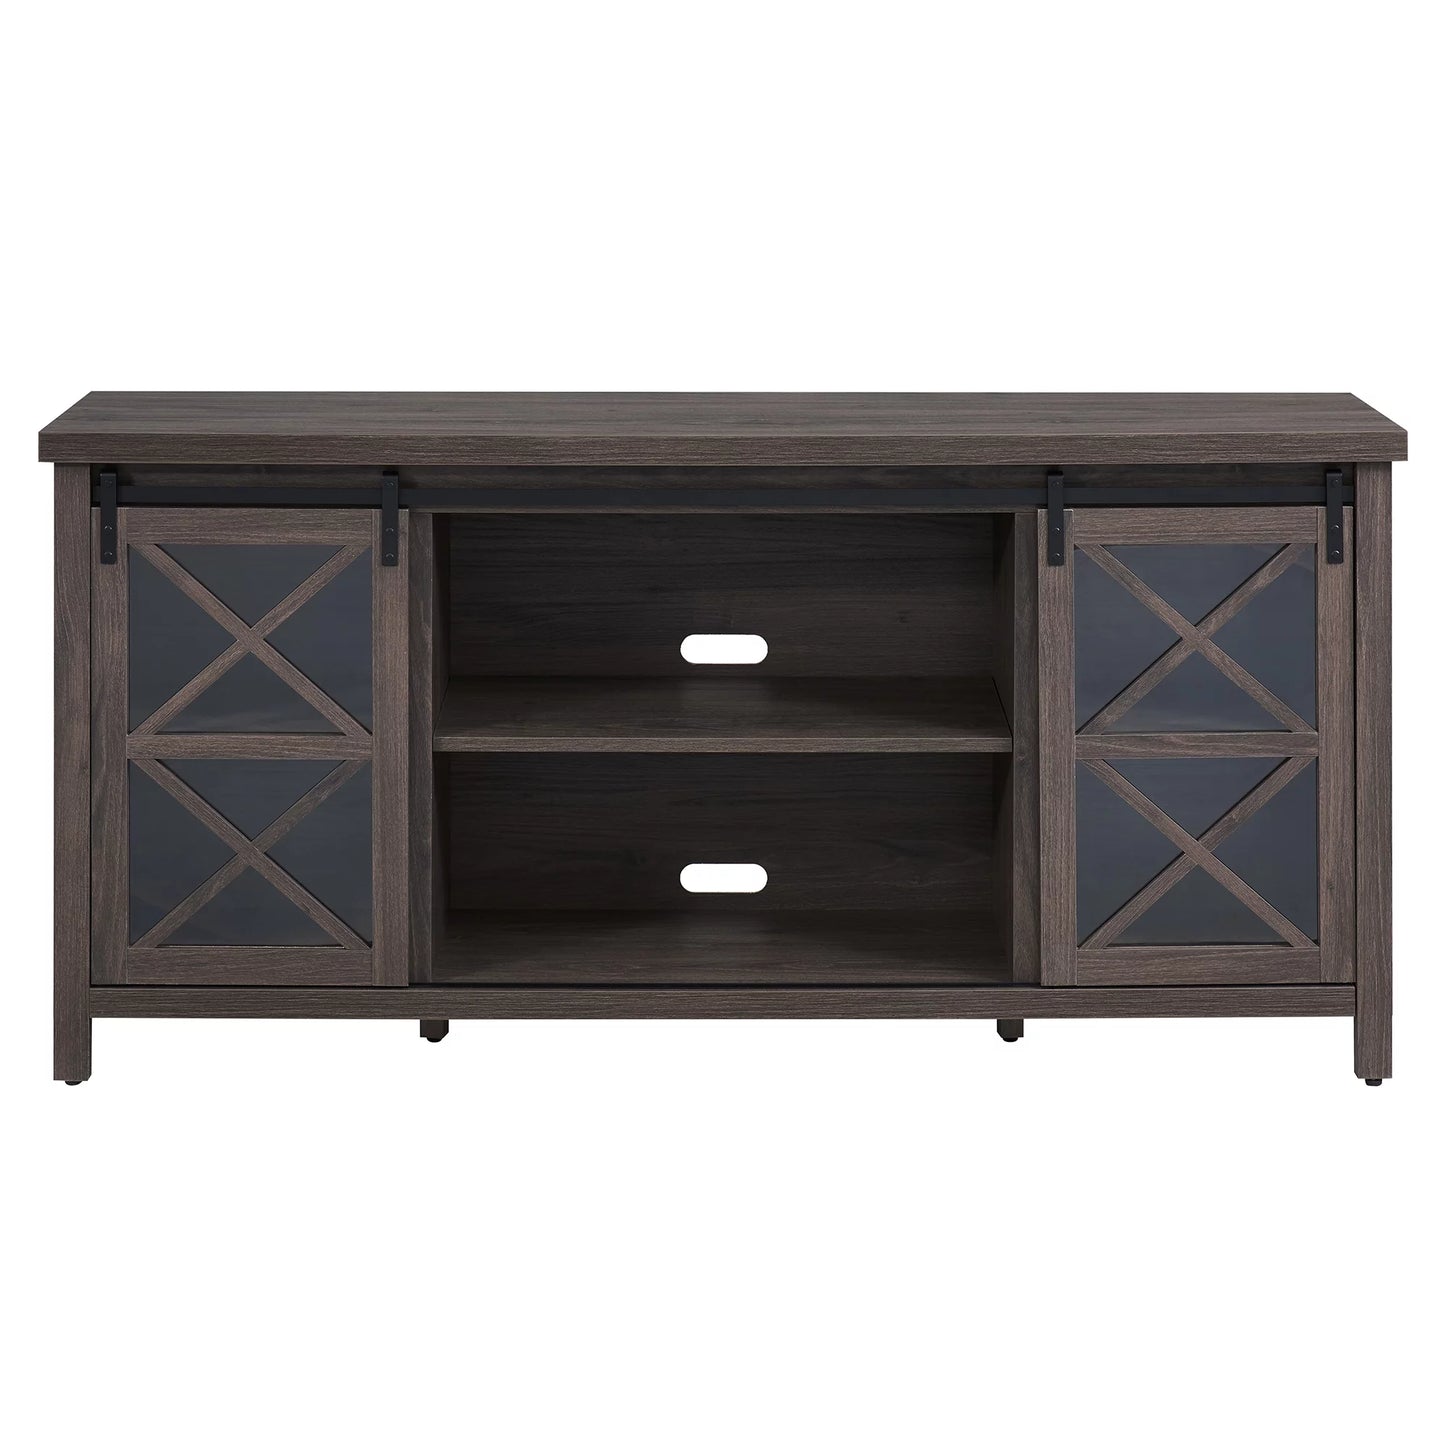 Addison&Lane Clementine TV Stand for TVs up to 80", Antiqued Gray Oak